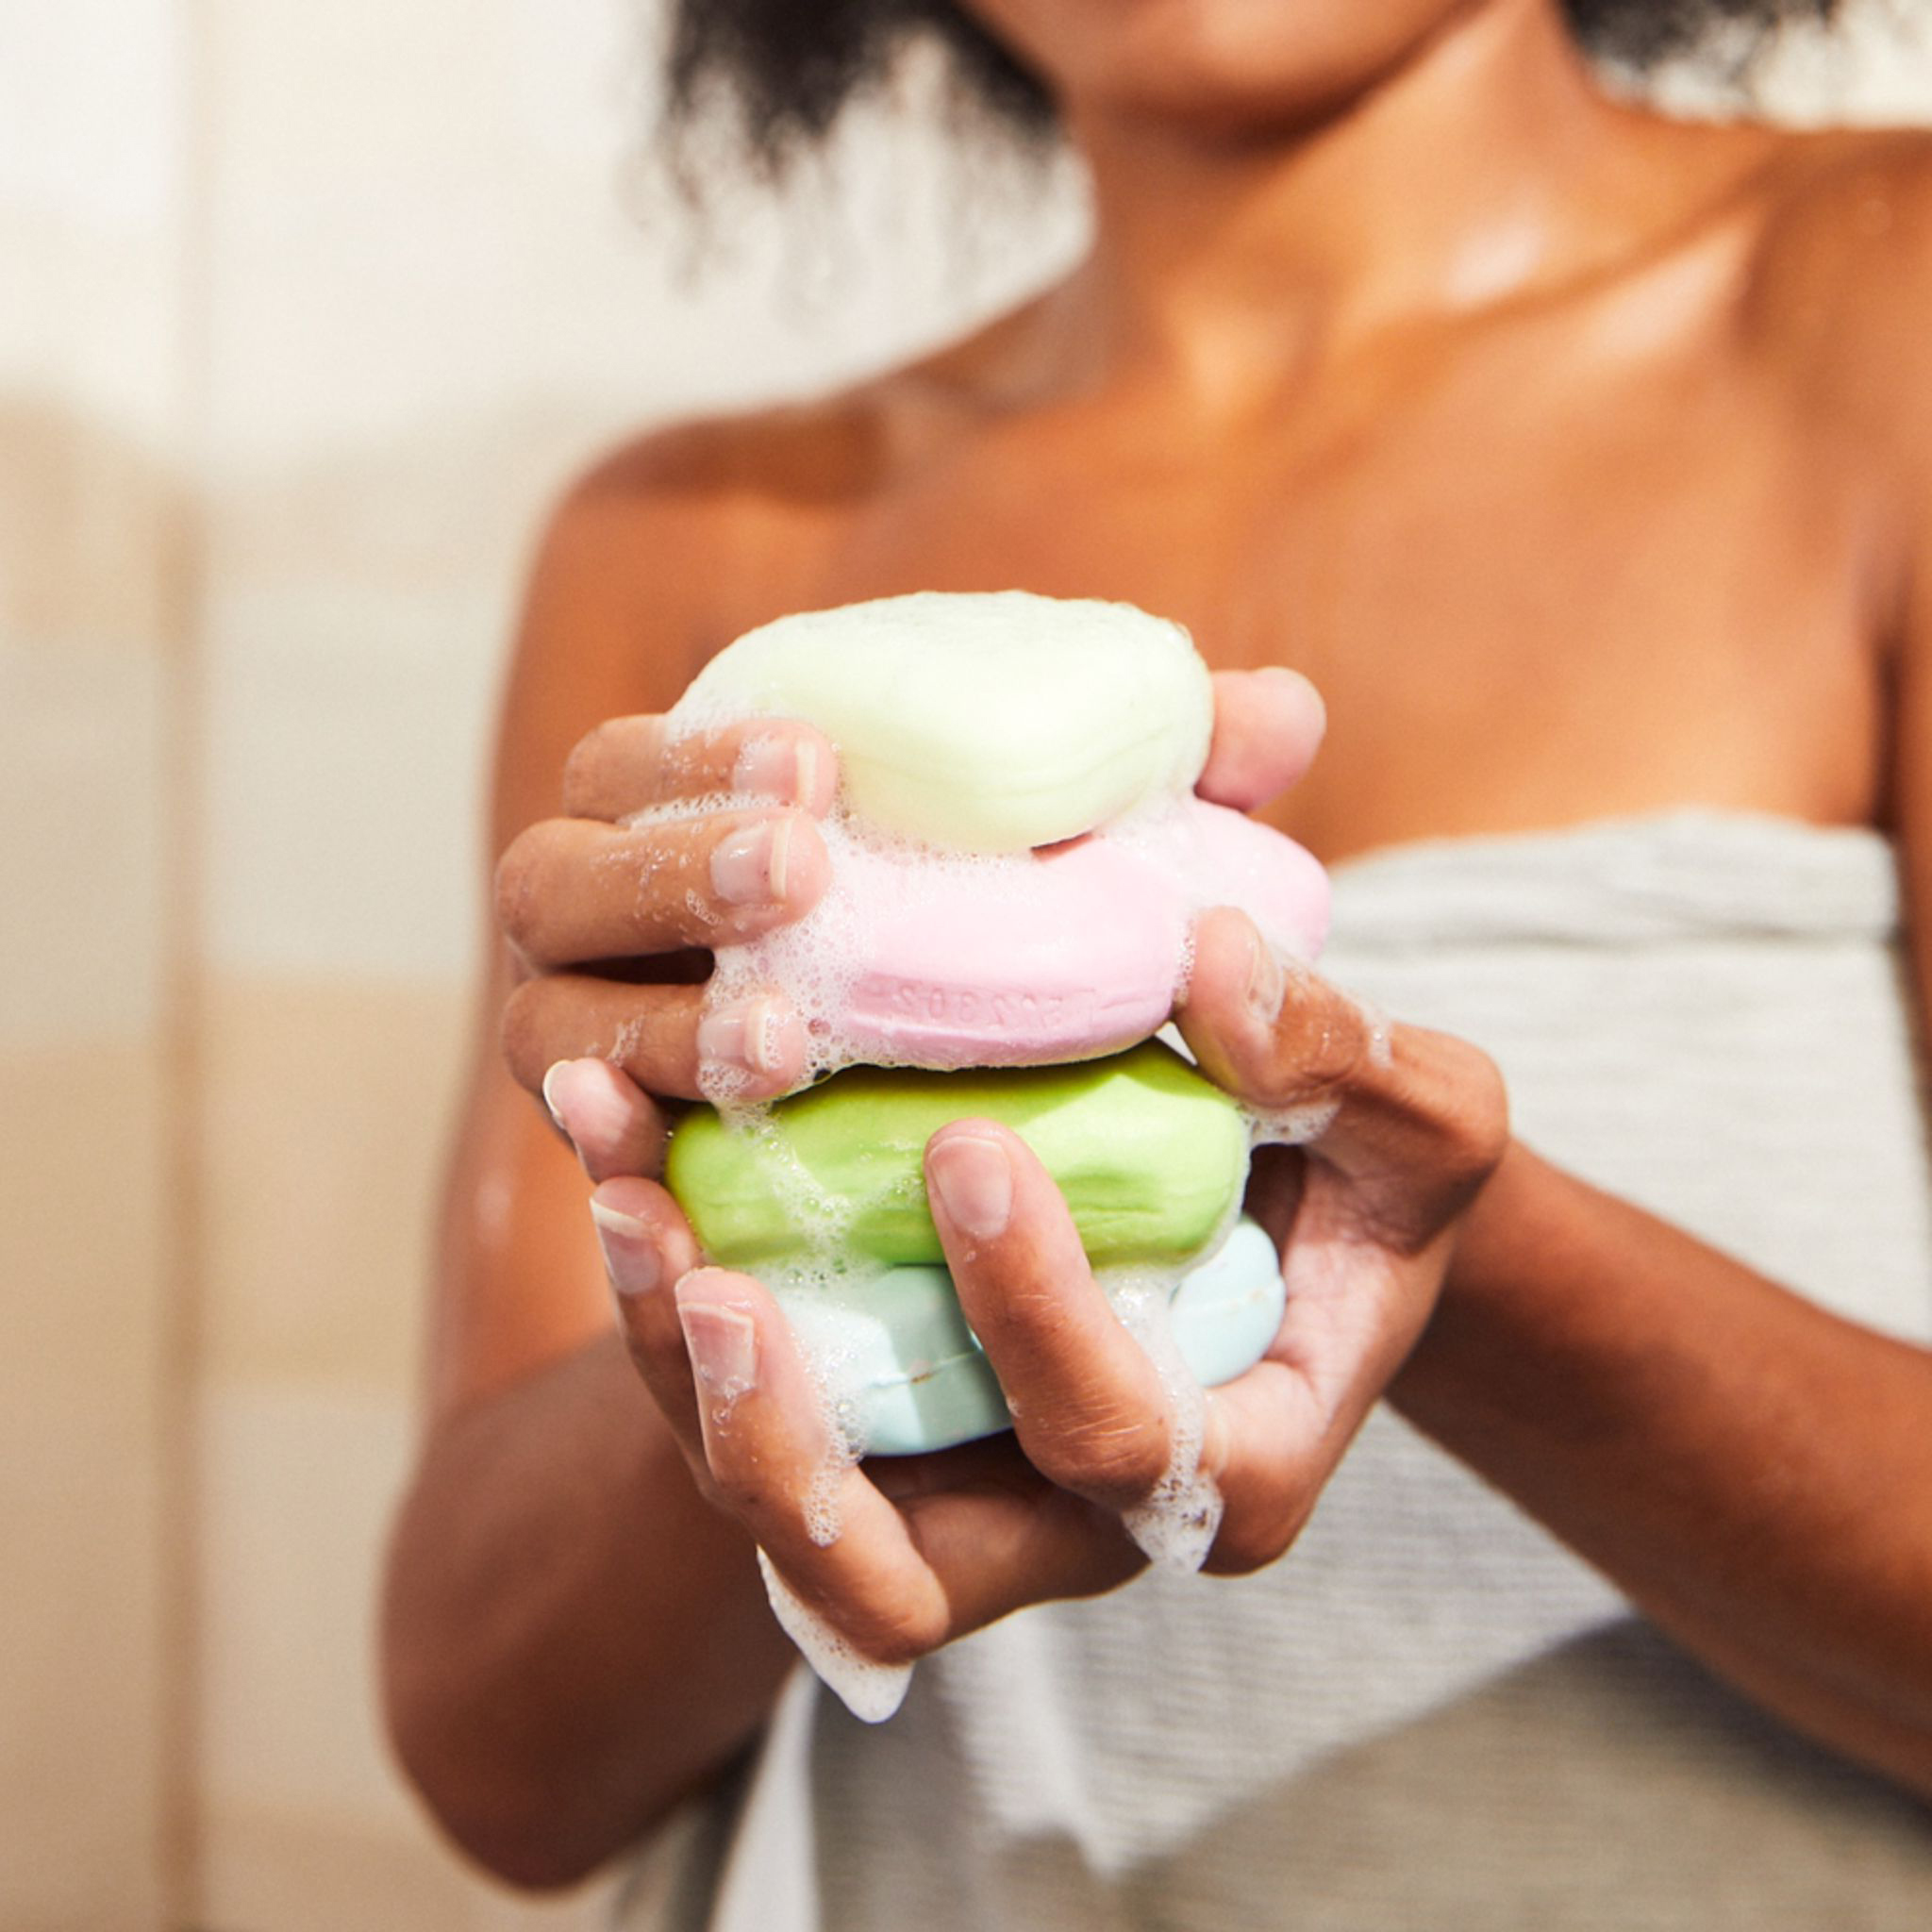 The 5 Best Soaps for Treating Pimples and Acne